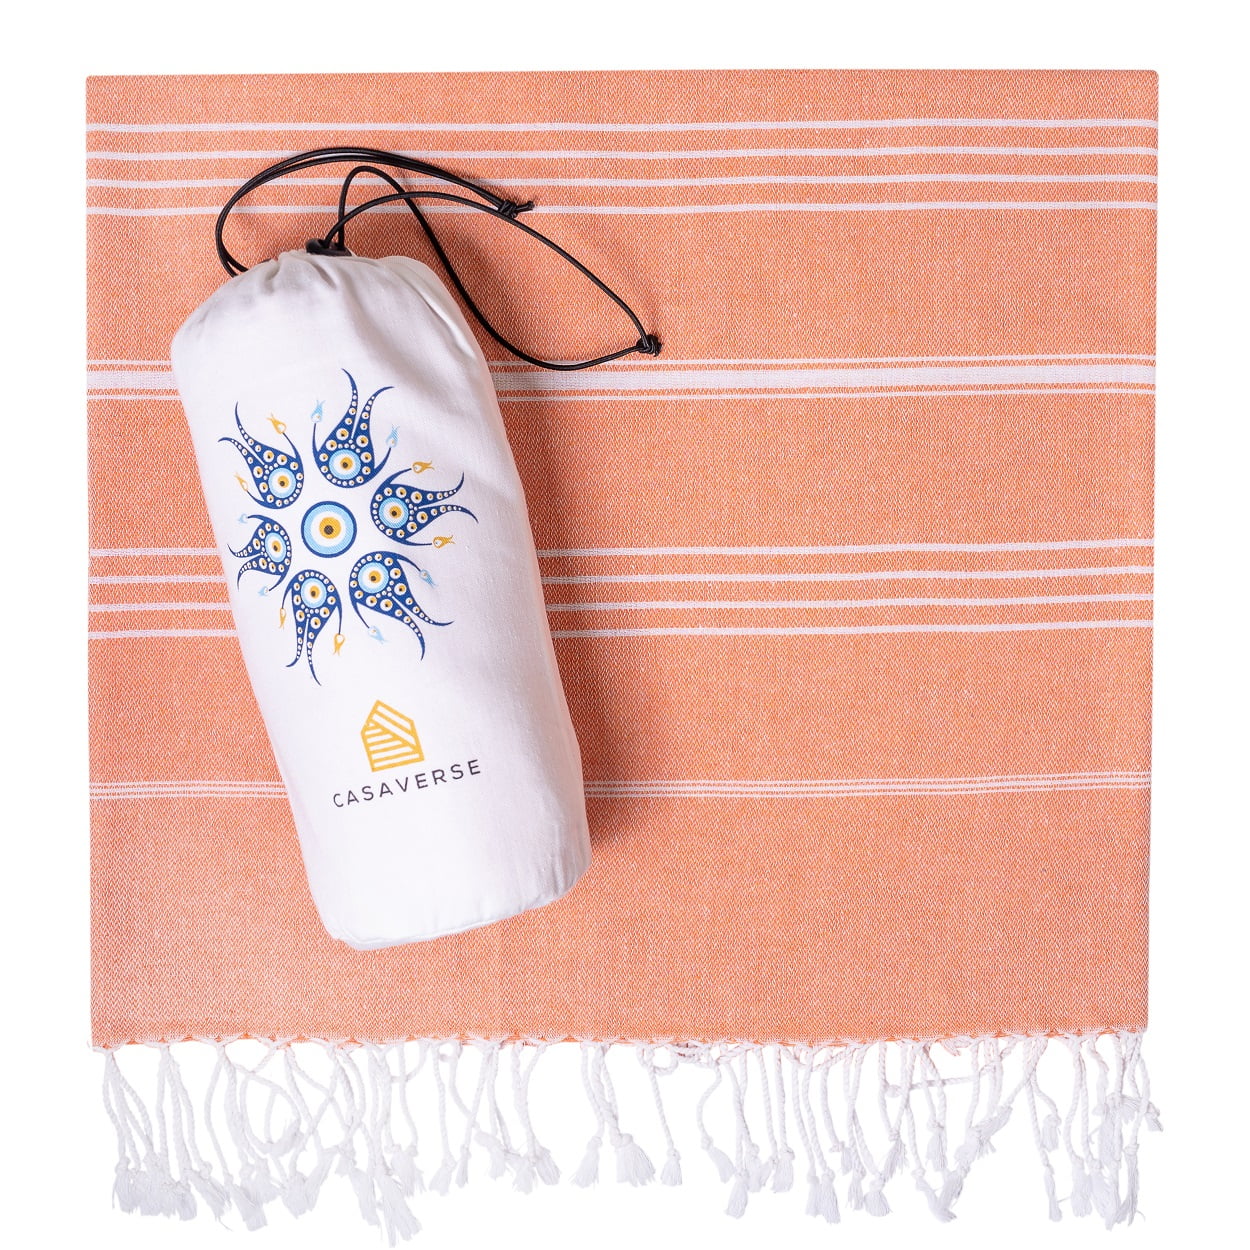 Zeus Original Turkish Beach Towel by Gold Case - Set of 4-100% Cotton - 67x38 Inches XXL Oversized - Pre-Washed - Quick Dry, Sand Free Turkish Towel